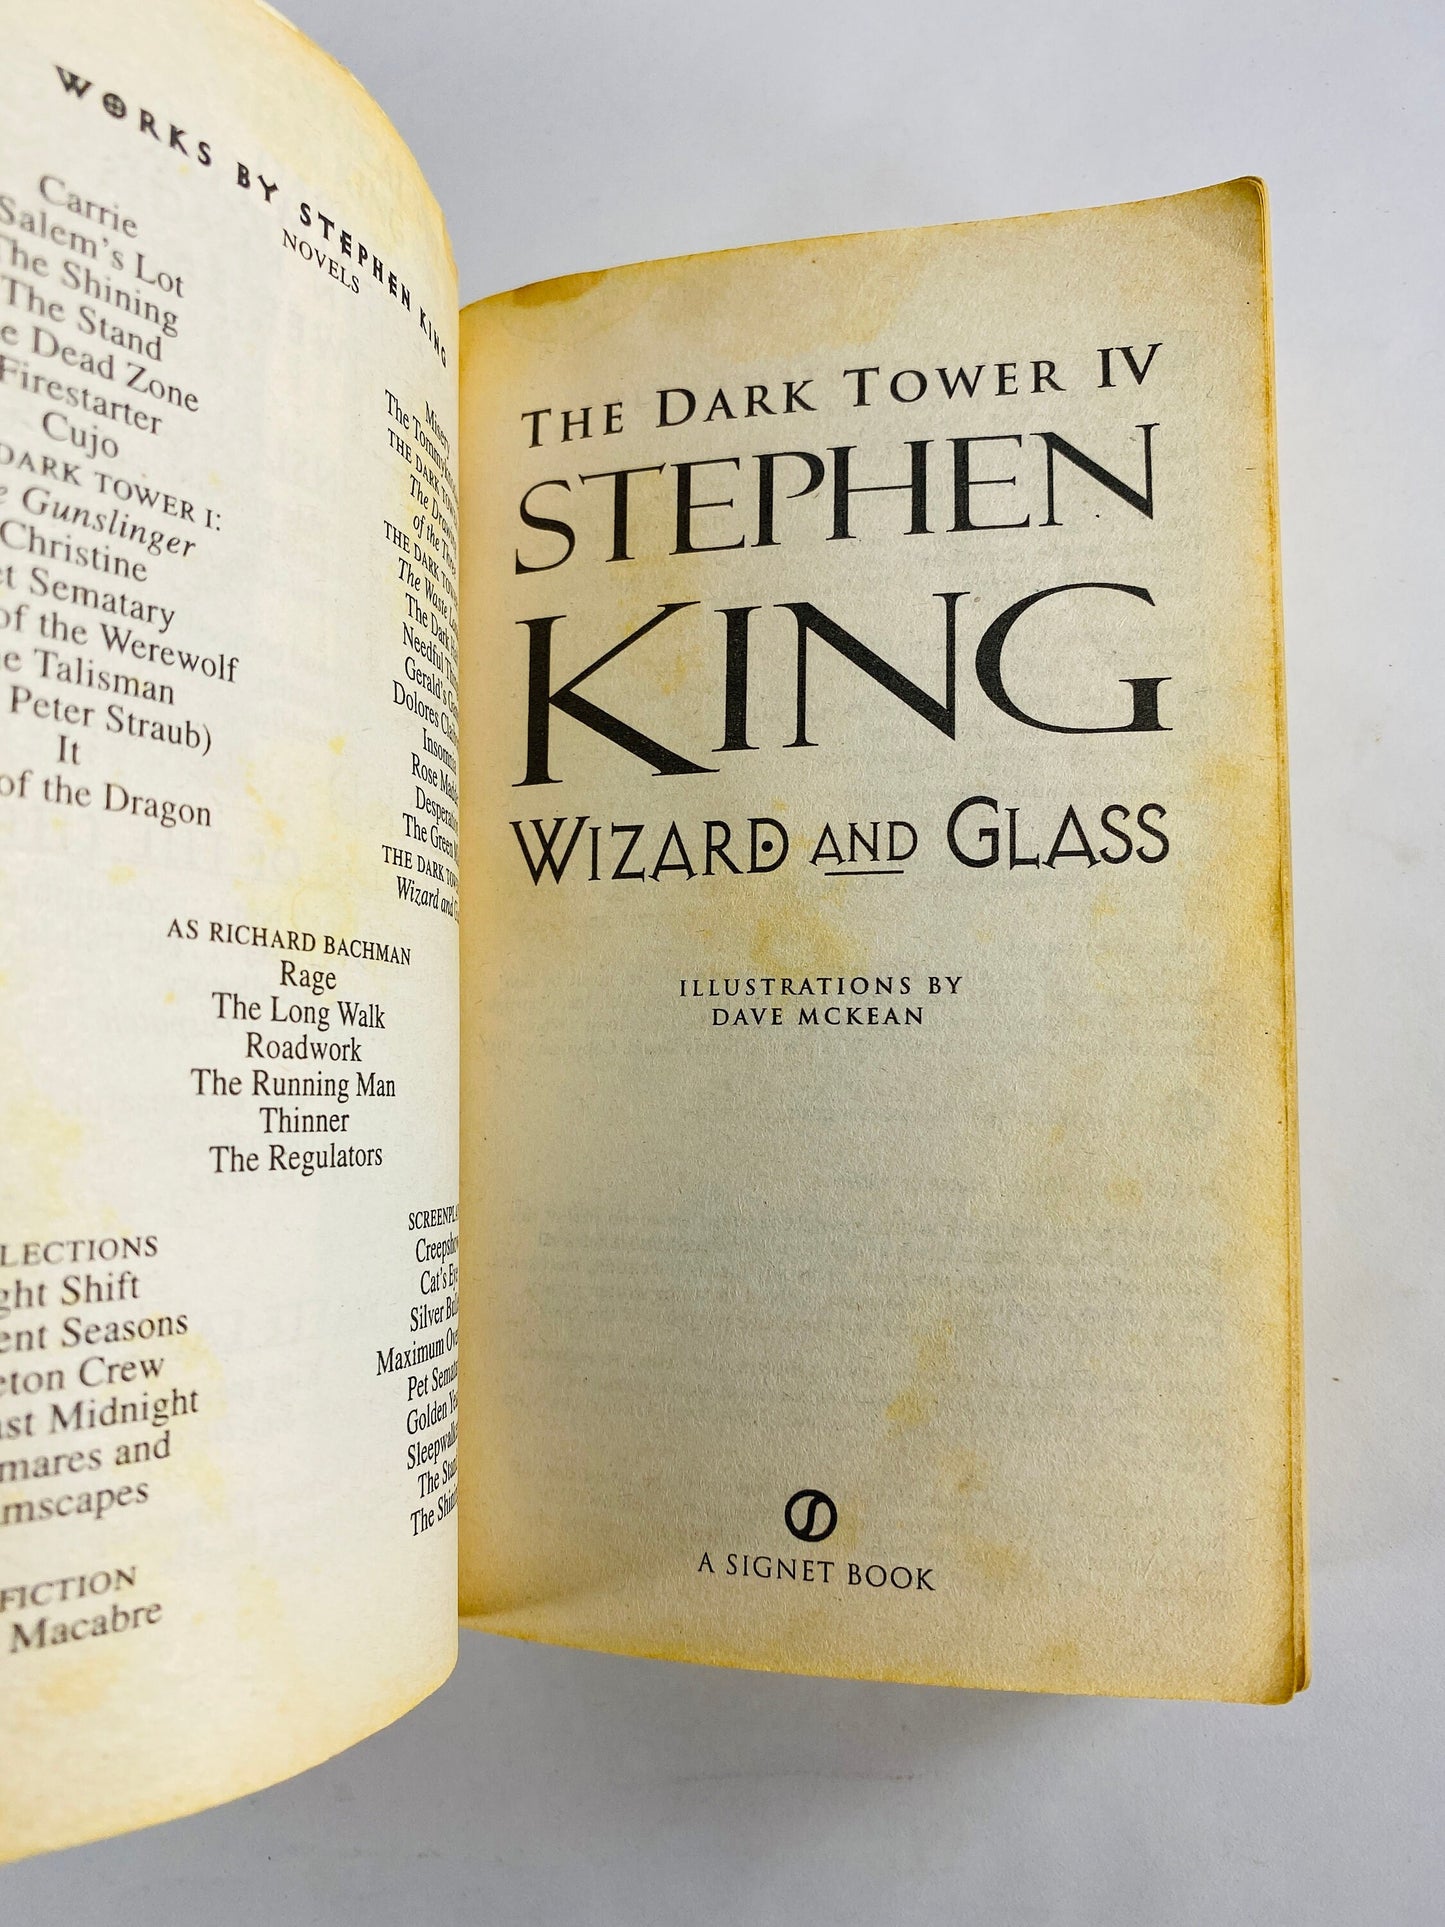 Wizard and Glass Dark Tower IV by Stephen King FIRST PRINTING vintage paperback book circa 1998 Horror goth emo black book decor